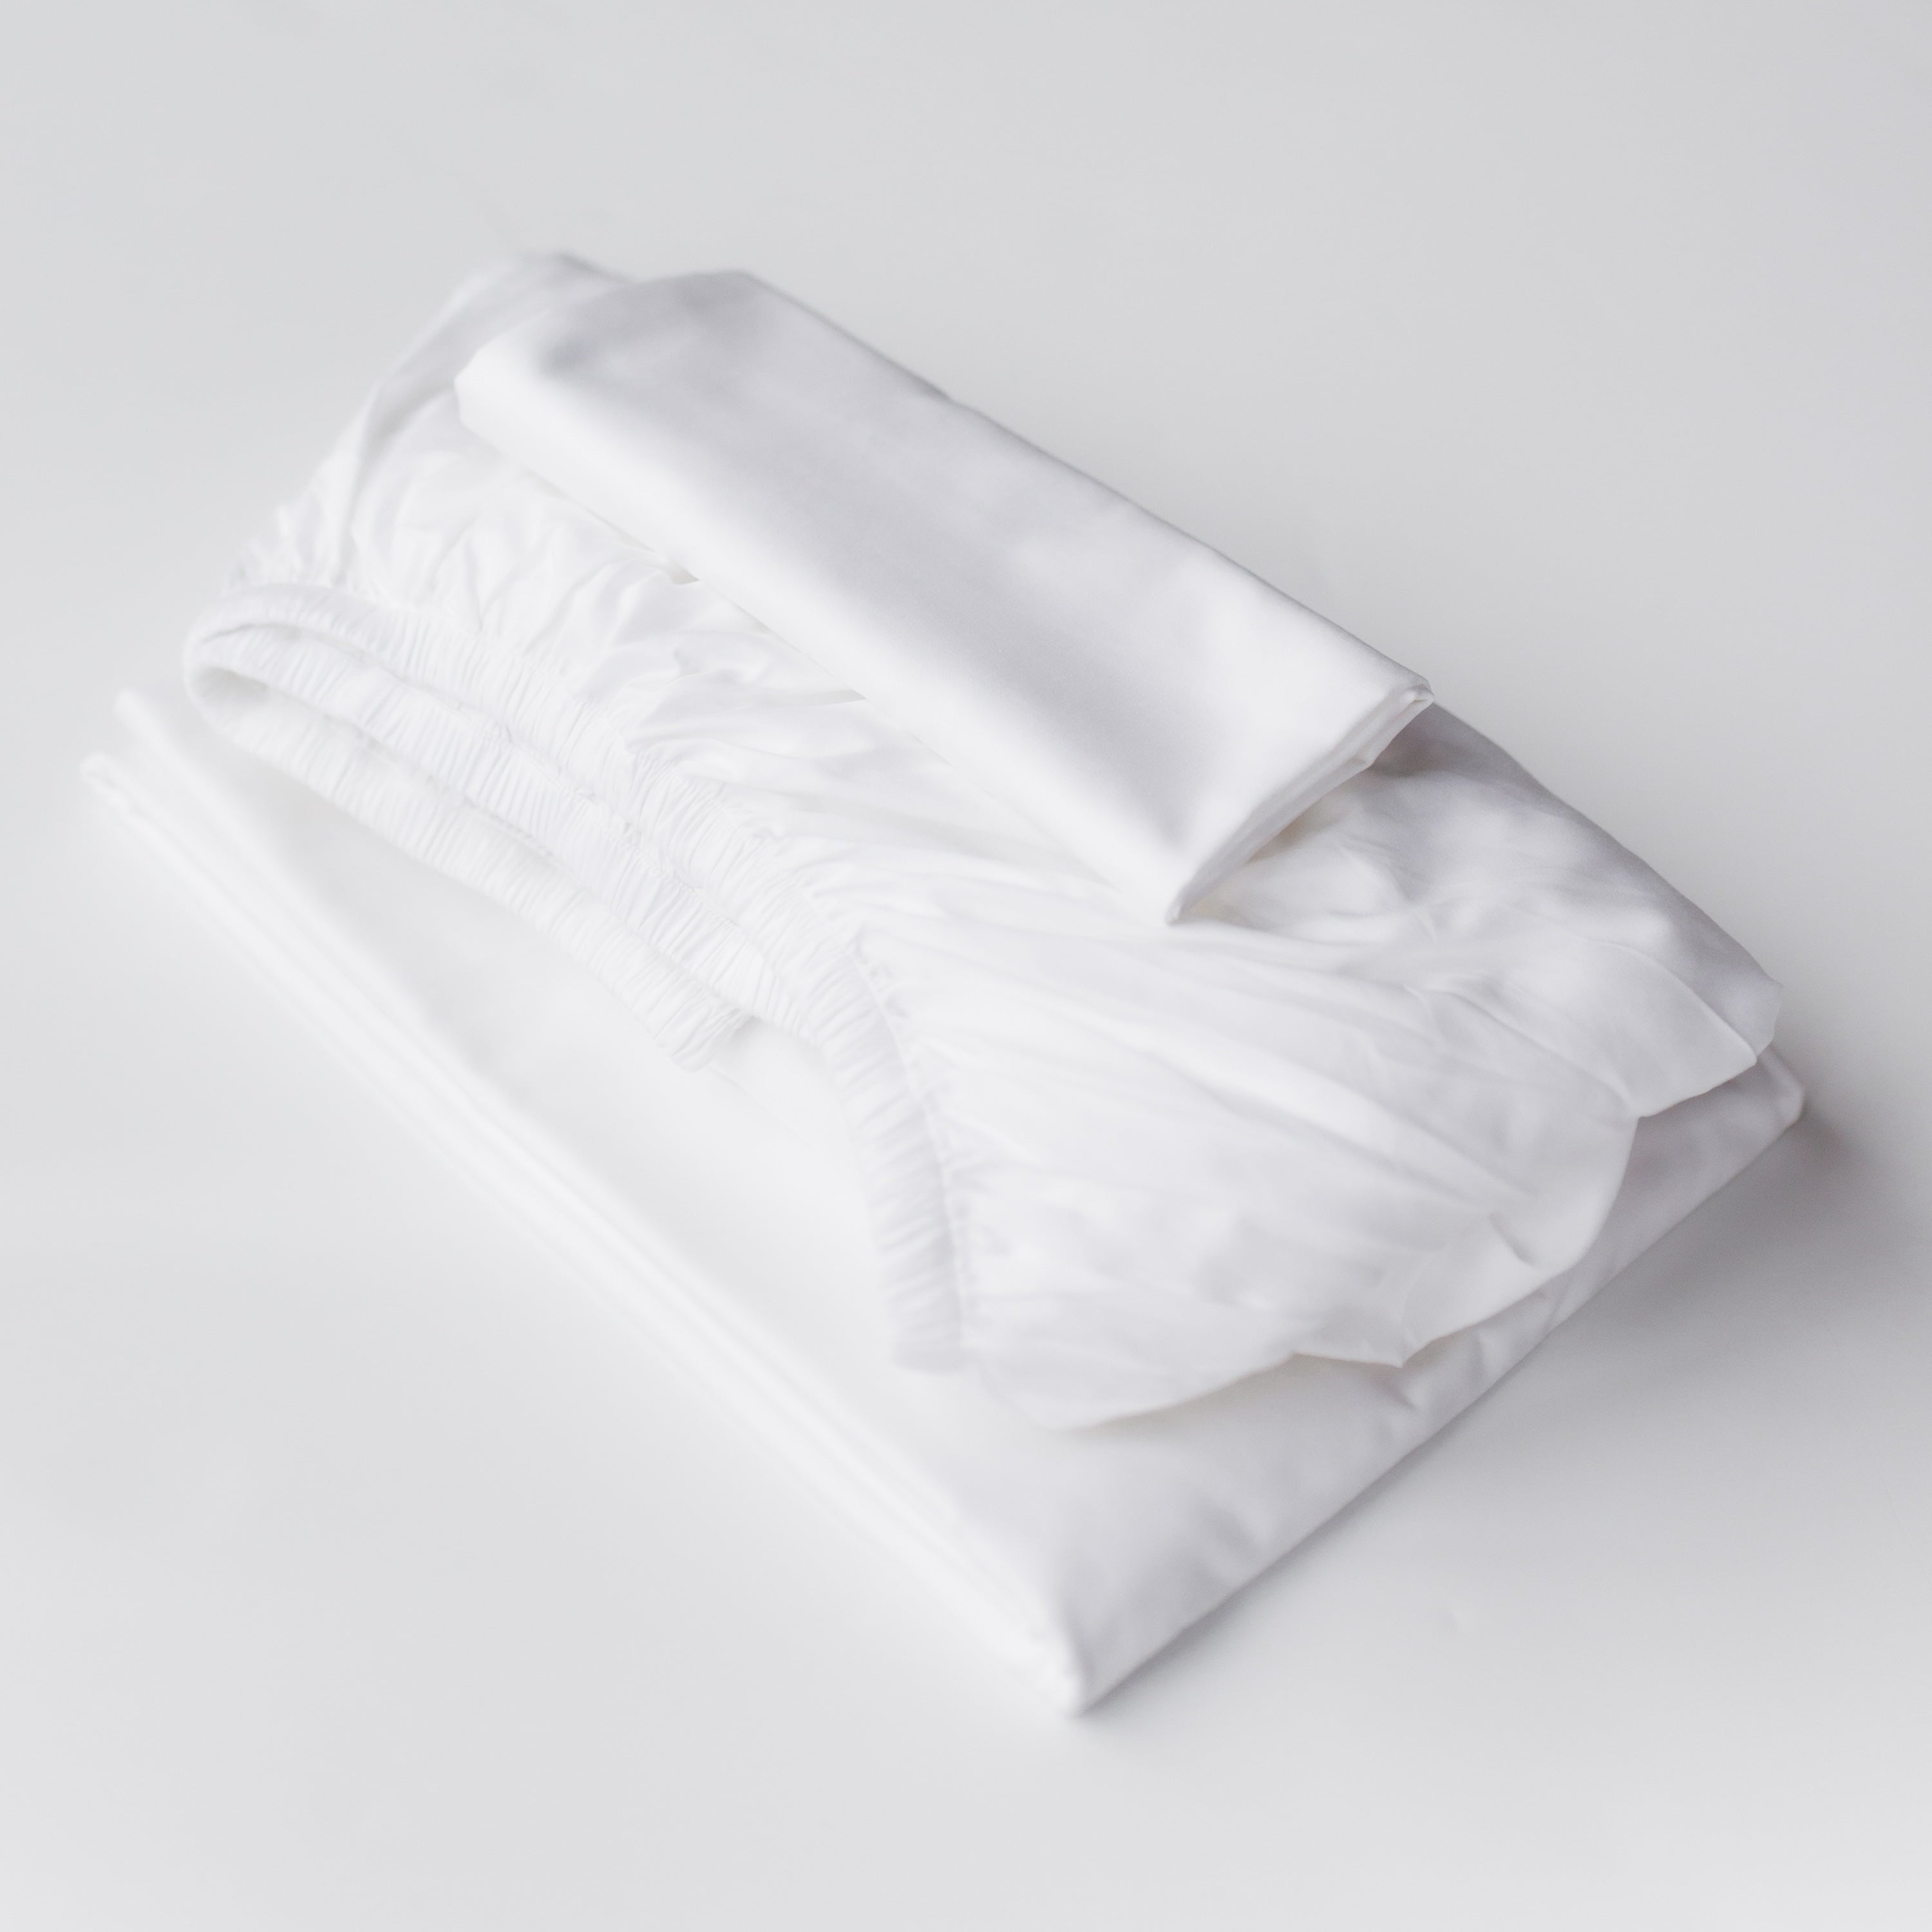 Oolie organic cotton pillowcases, flat sheet, and fitted sheet in white cotton, folded flat and stacked on a white background.